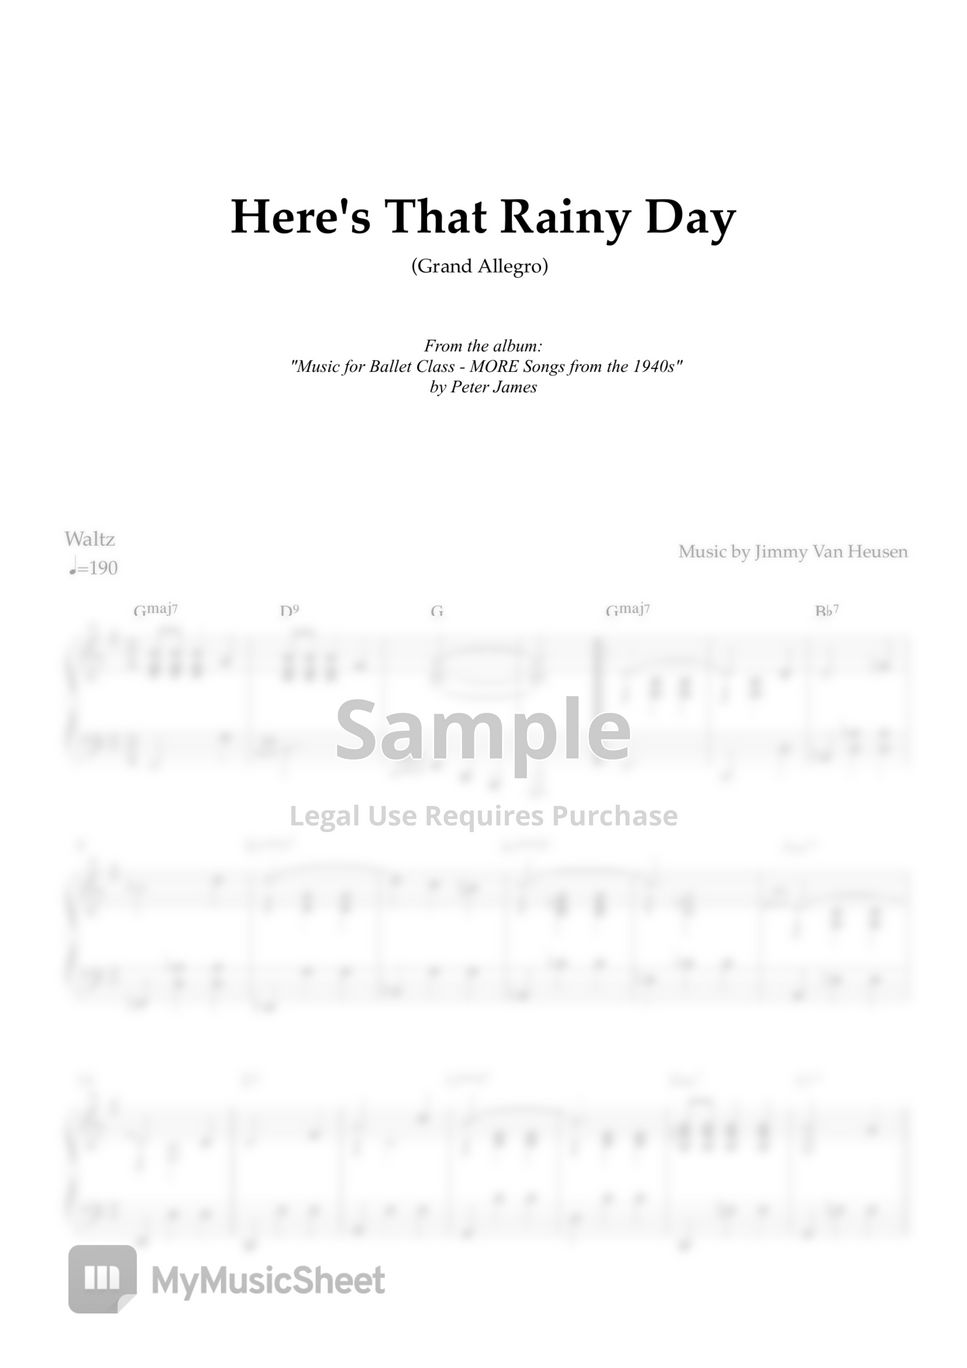 Jimmy Van Heusen/Frank Sinatra - Here's That Rainy Day (Grand Allegro) by Peter James